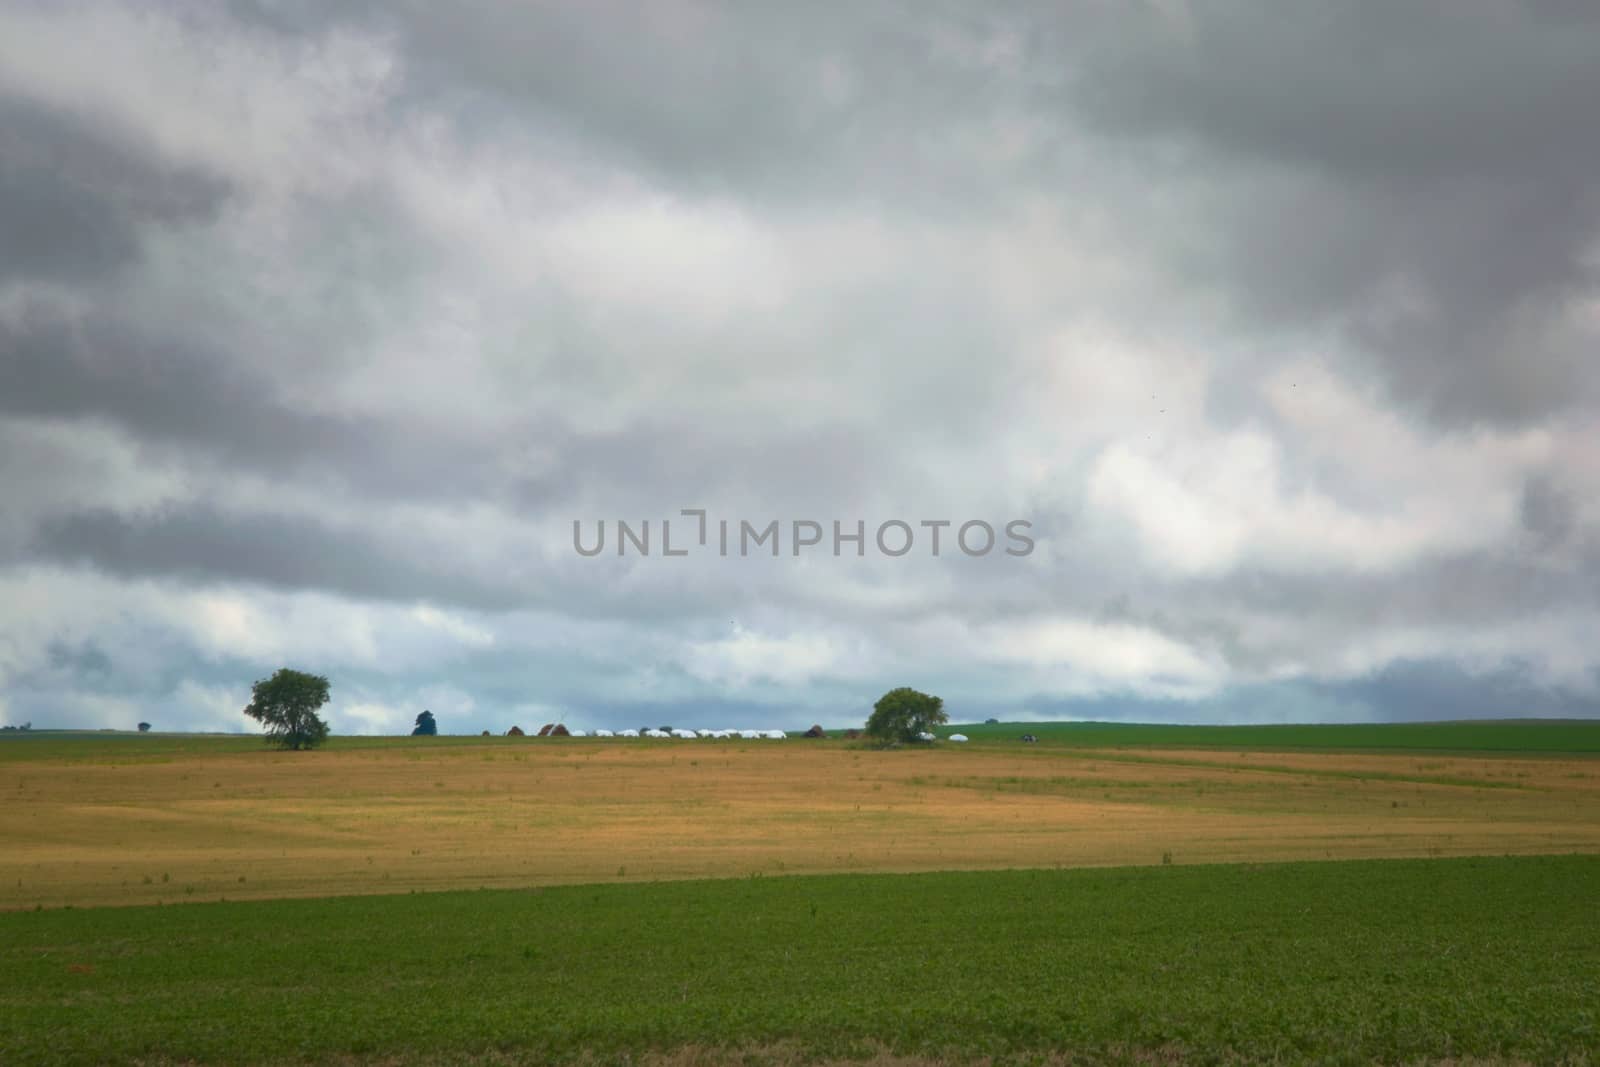 Heavy storm clouds over an agricultural field in San Luis, Argentina.